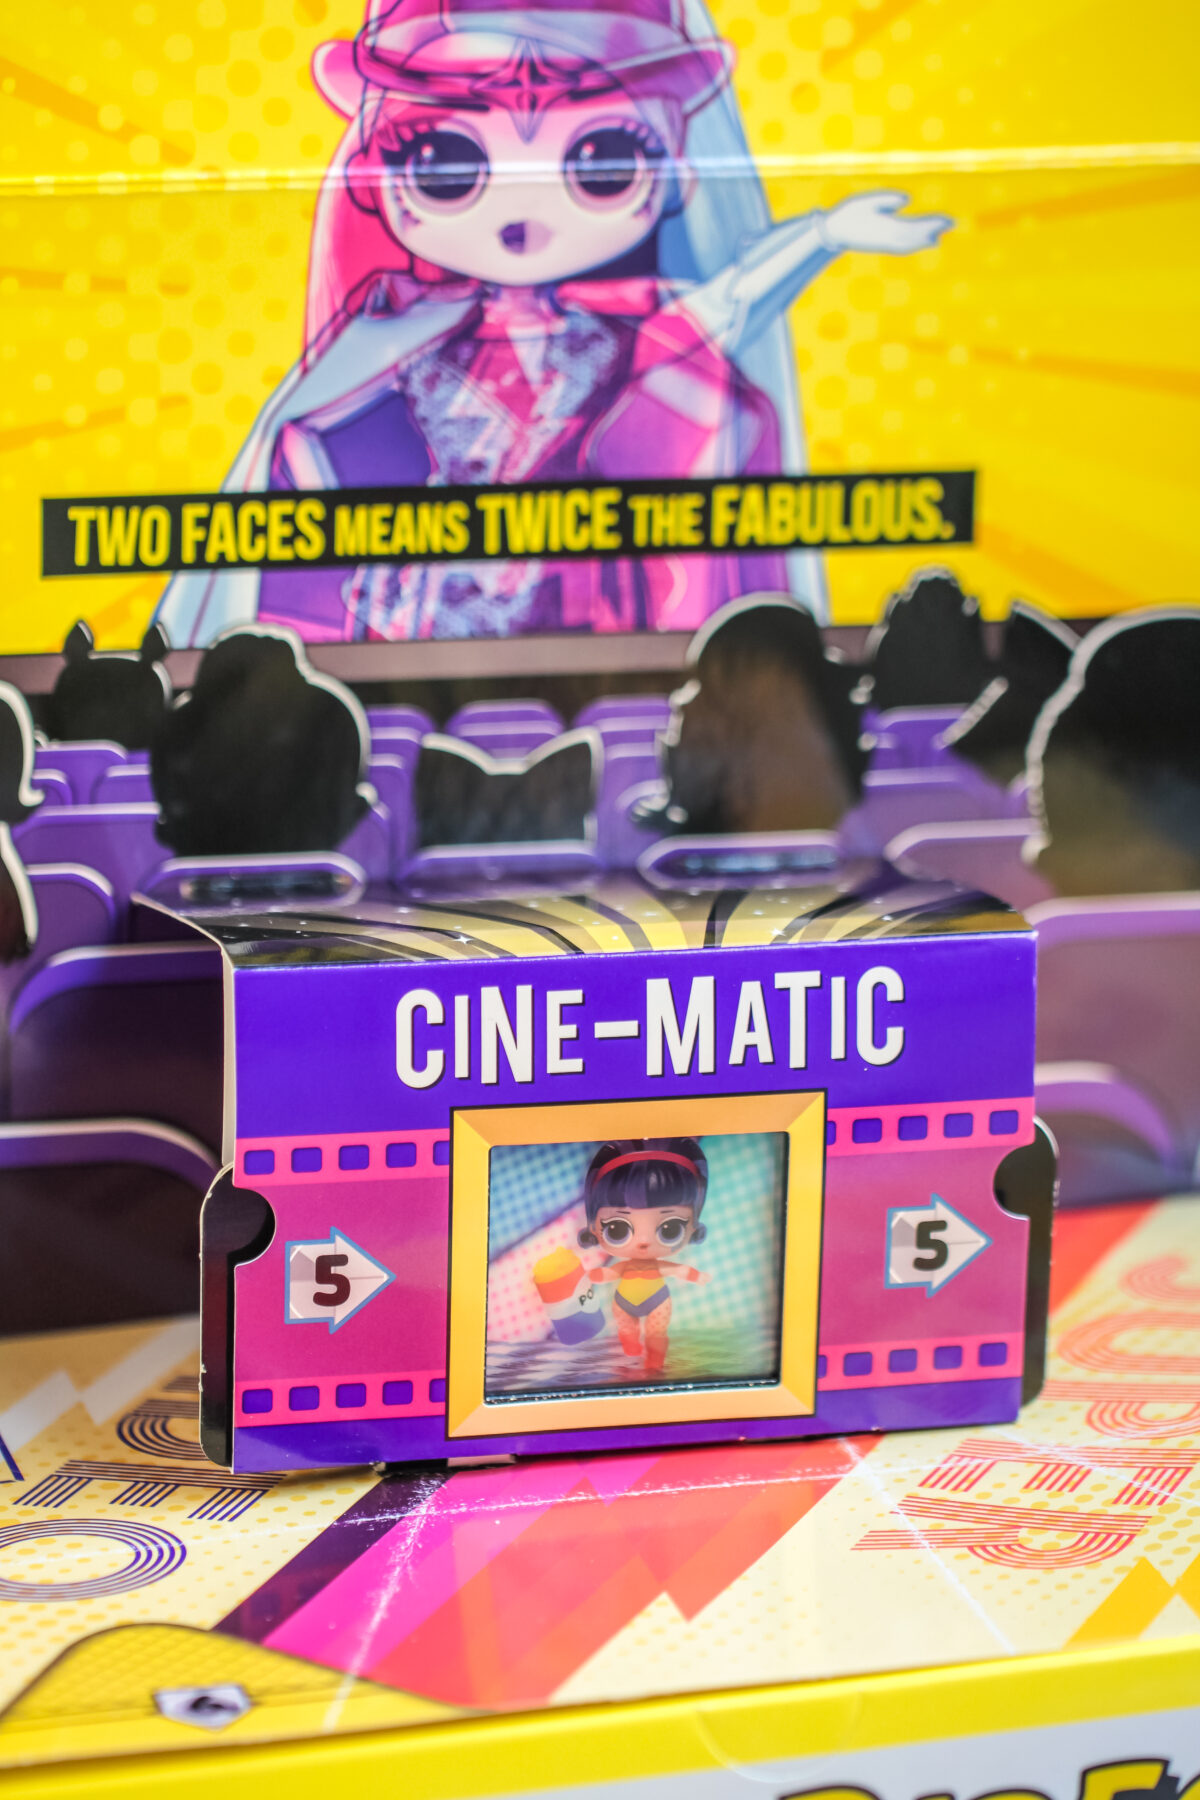 Introducing LOL Surprise OMG Movie Magic fashion dolls. Unbox 25 surprises including 1 of 4 stunning Movie Magic dolls and 3D glasses!